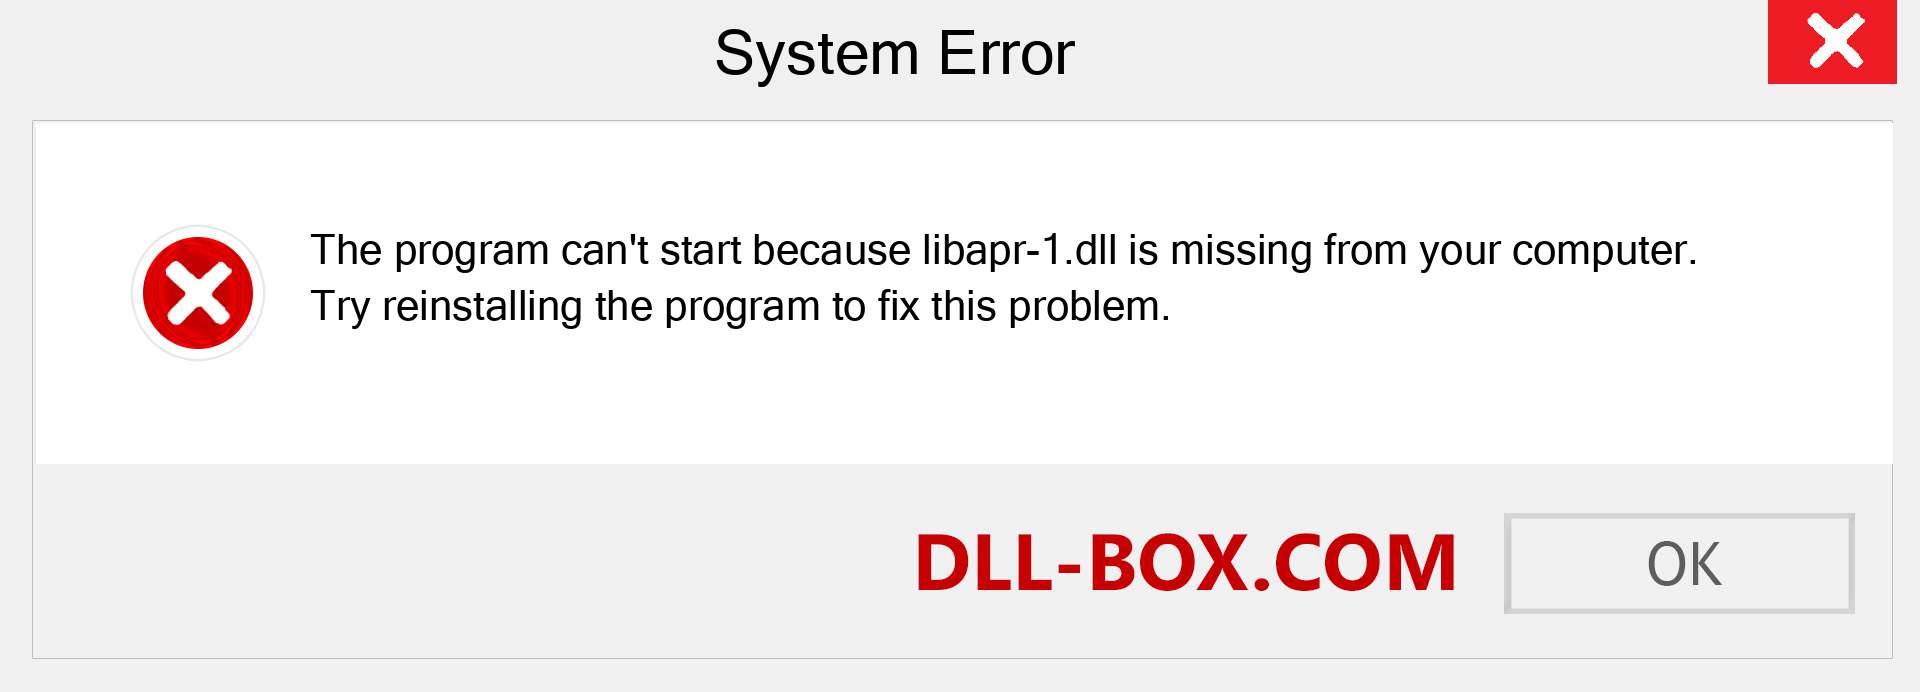  libapr-1.dll file is missing?. Download for Windows 7, 8, 10 - Fix  libapr-1 dll Missing Error on Windows, photos, images